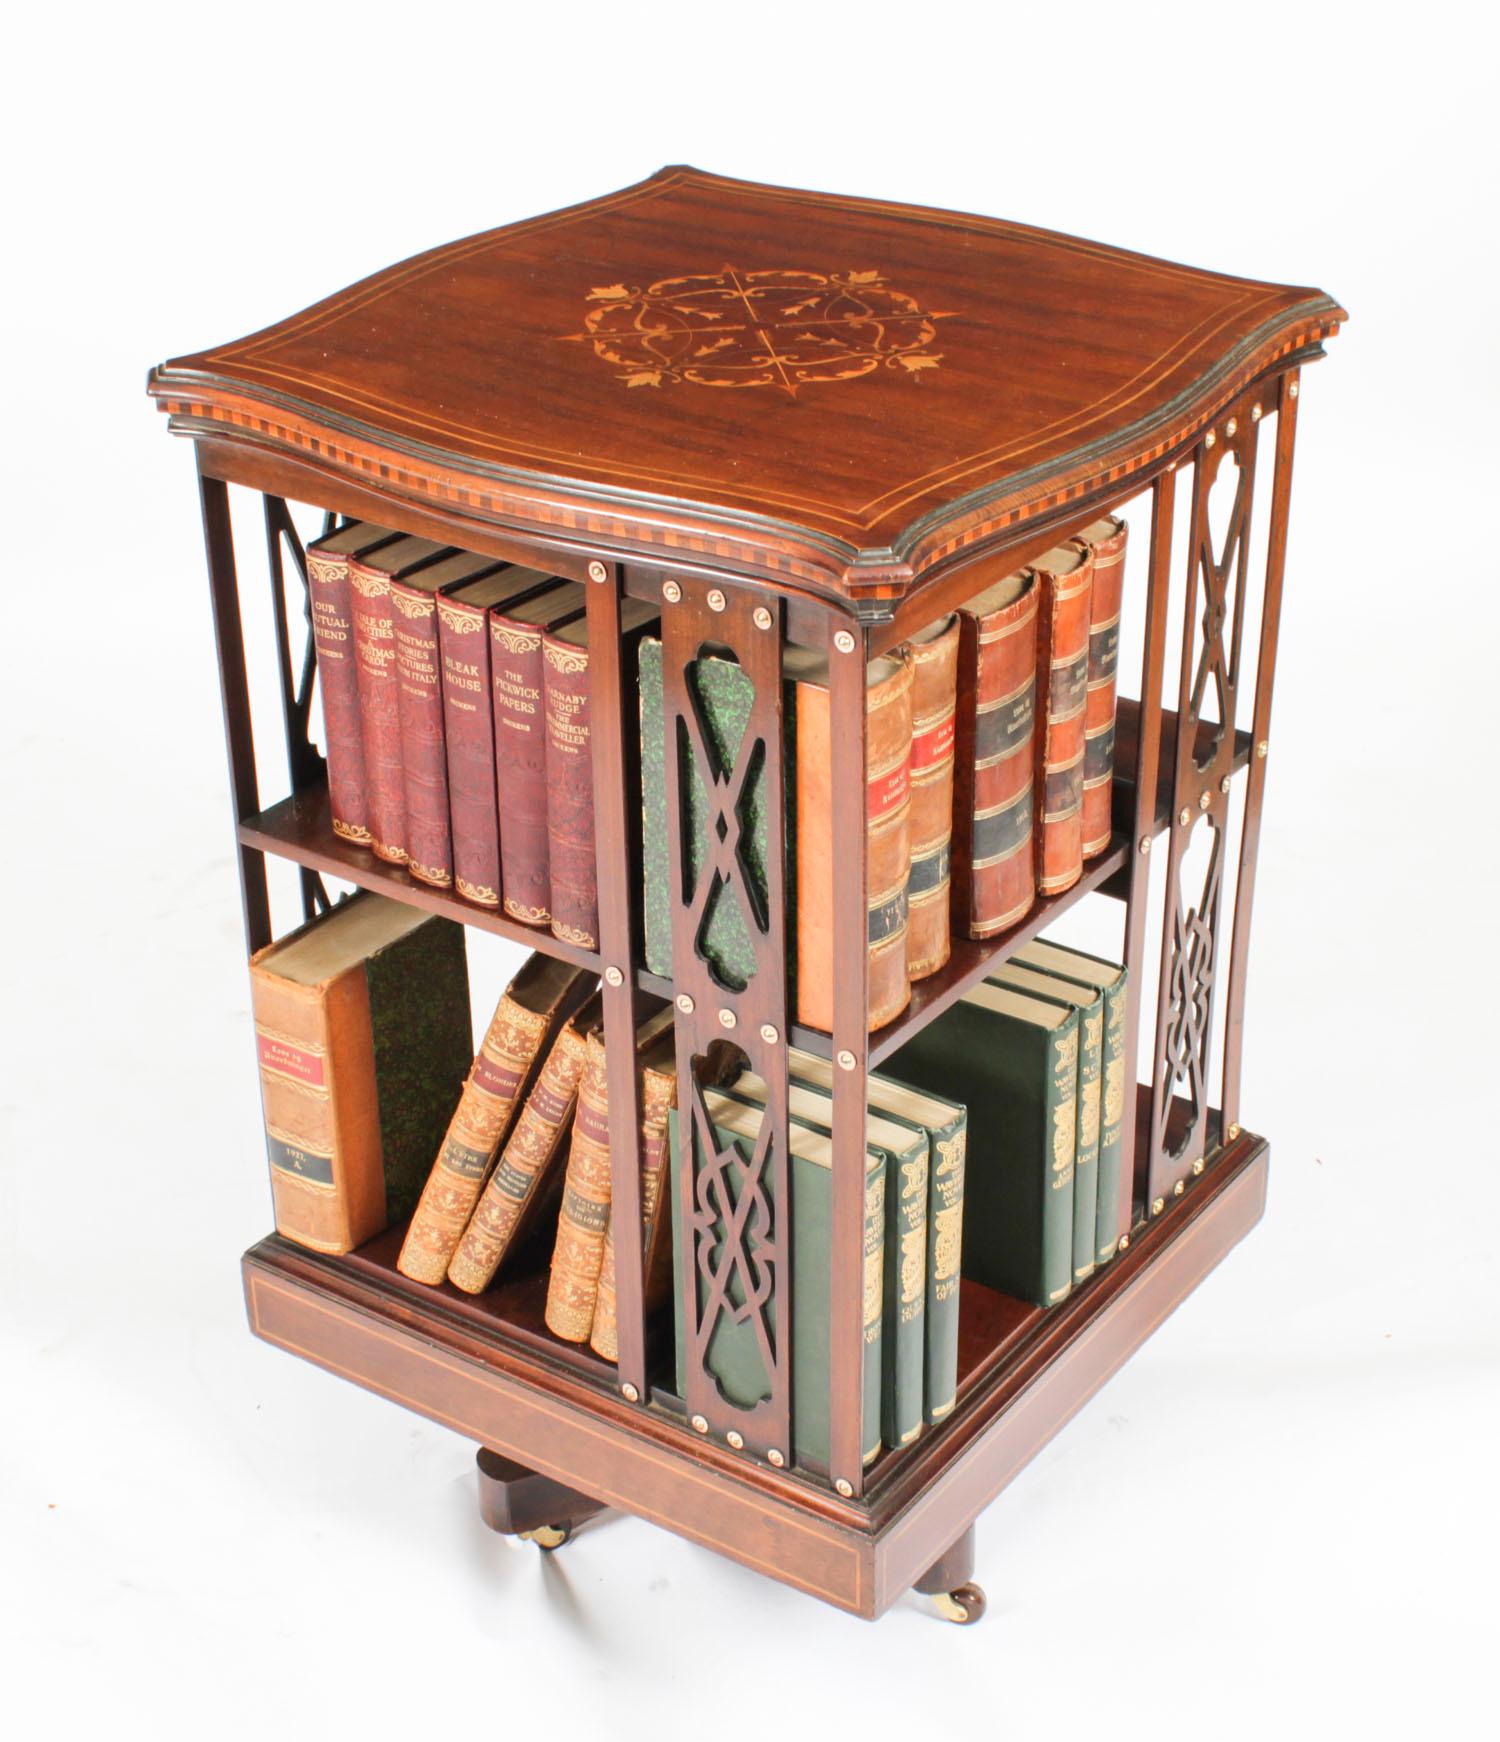 This is an exquisite English antique late Victorian mahogany and marquetry inlaid revolving bookcase, circa 1890 in date.
 
The top has elaborate circular foliate marquetry inlaid decoration to the centre  as well as satinwood crossbanding around